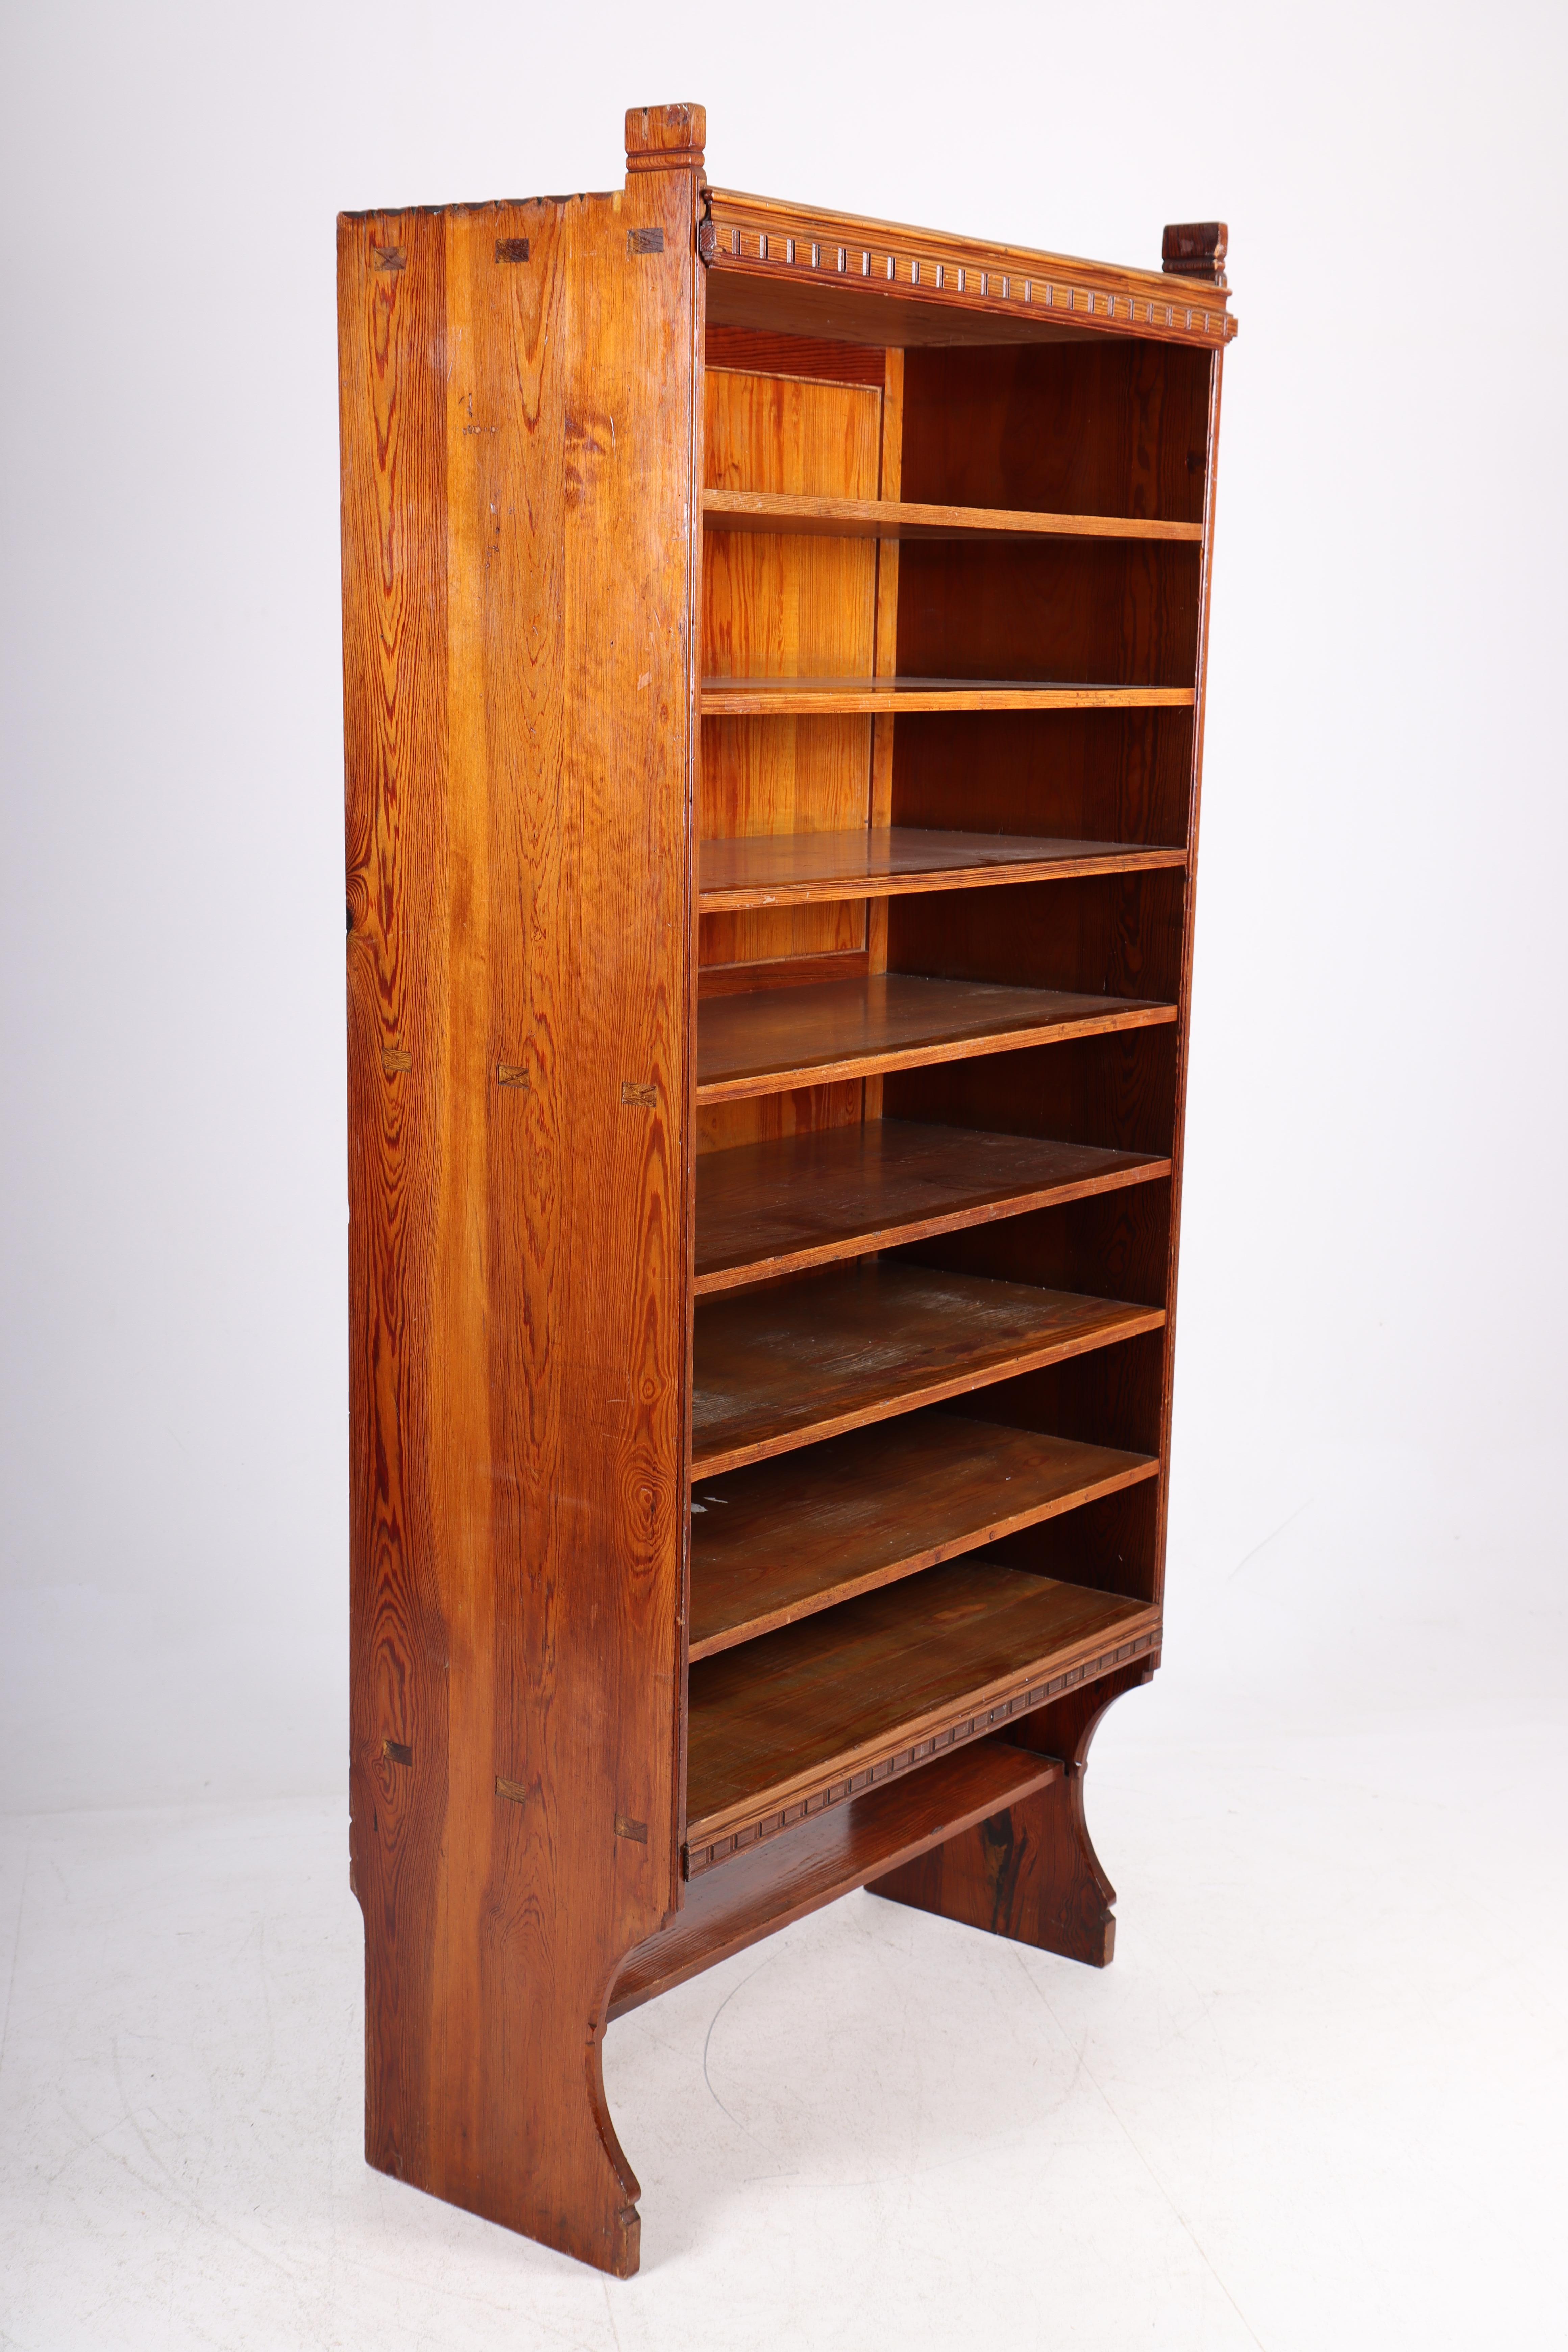 Early 20th Century Bookcase in Solid Pine Designed by Martin Nyrop for Rud Rasmussen For Sale